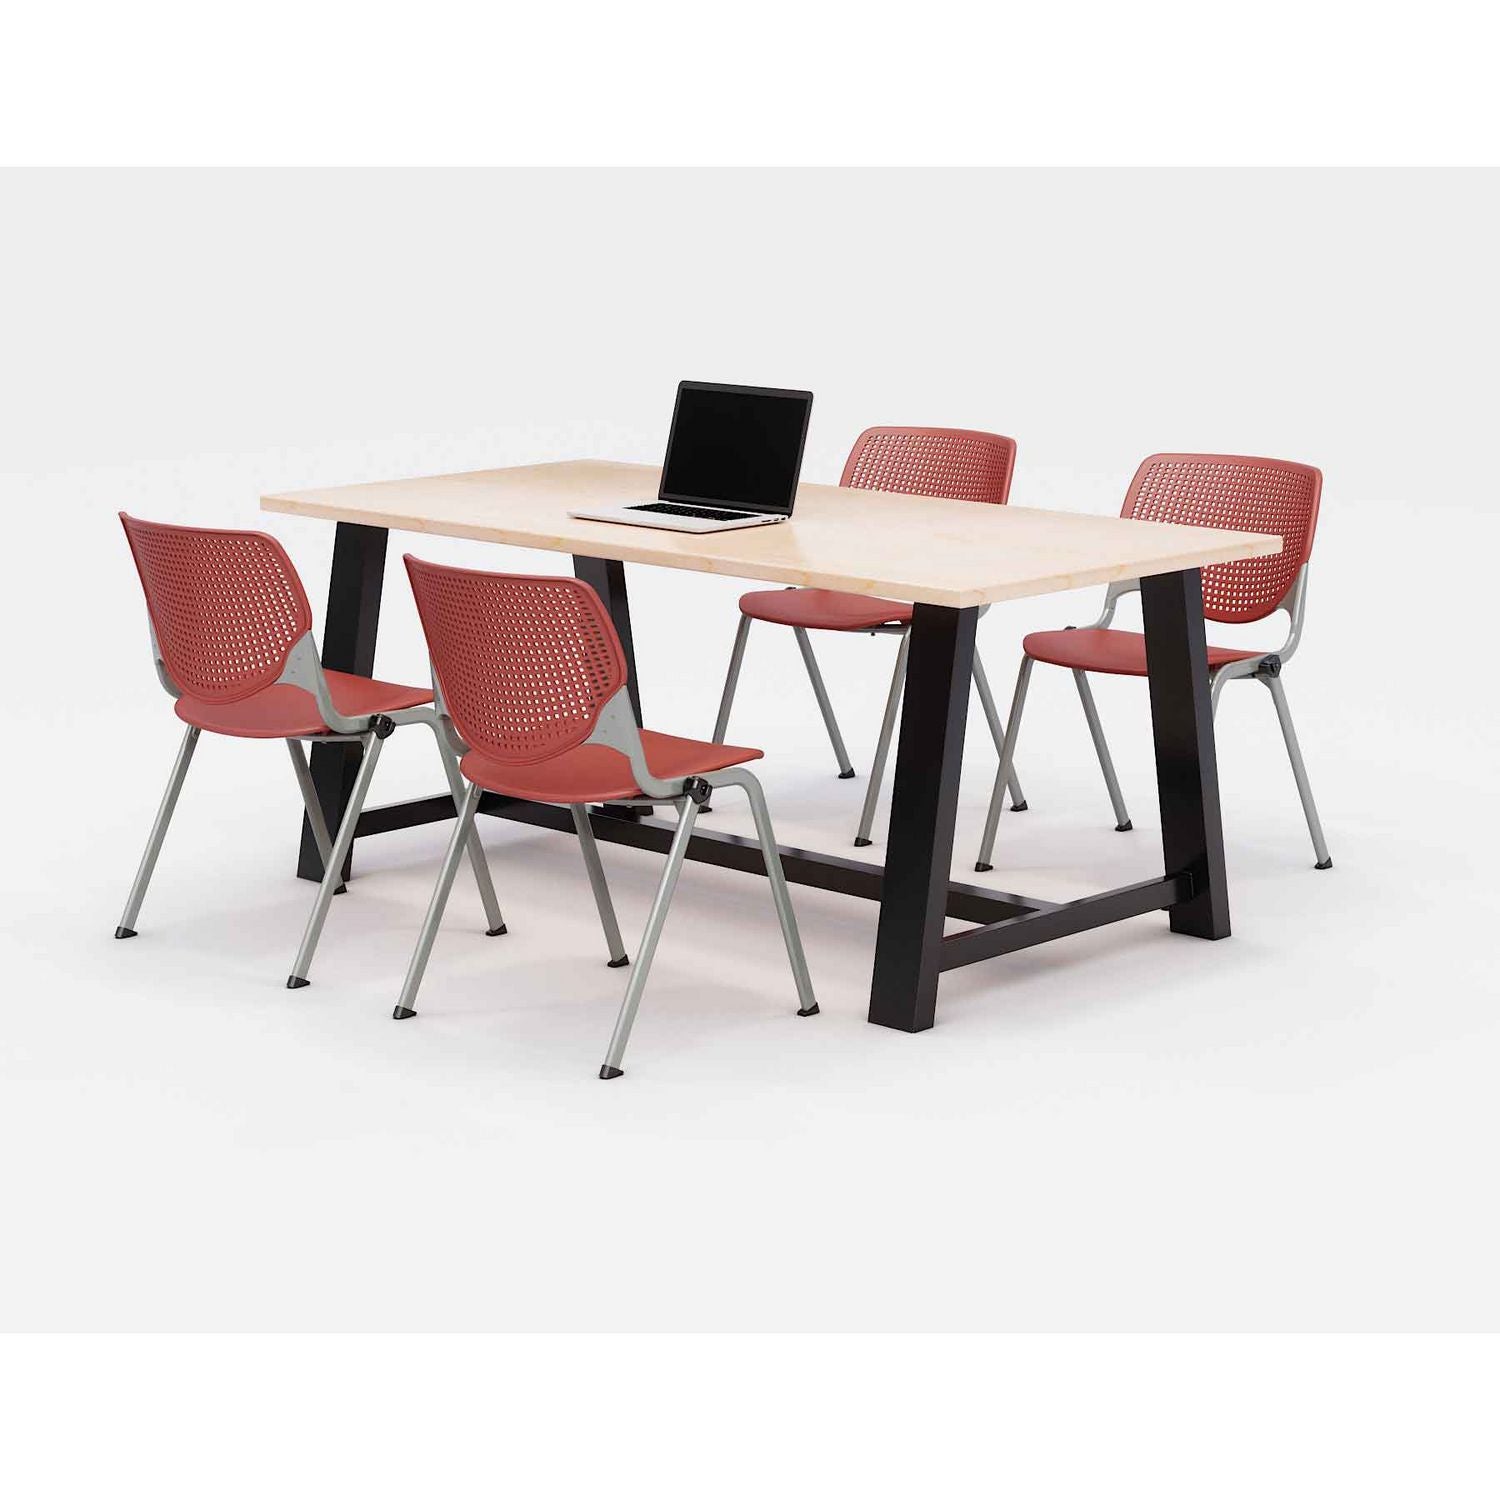 midtown-dining-table-with-four-coral-kool-series-chairs-36-x-72-x-30-kensington-maple-ships-in-4-6-business-days_kfi840031900531 - 1